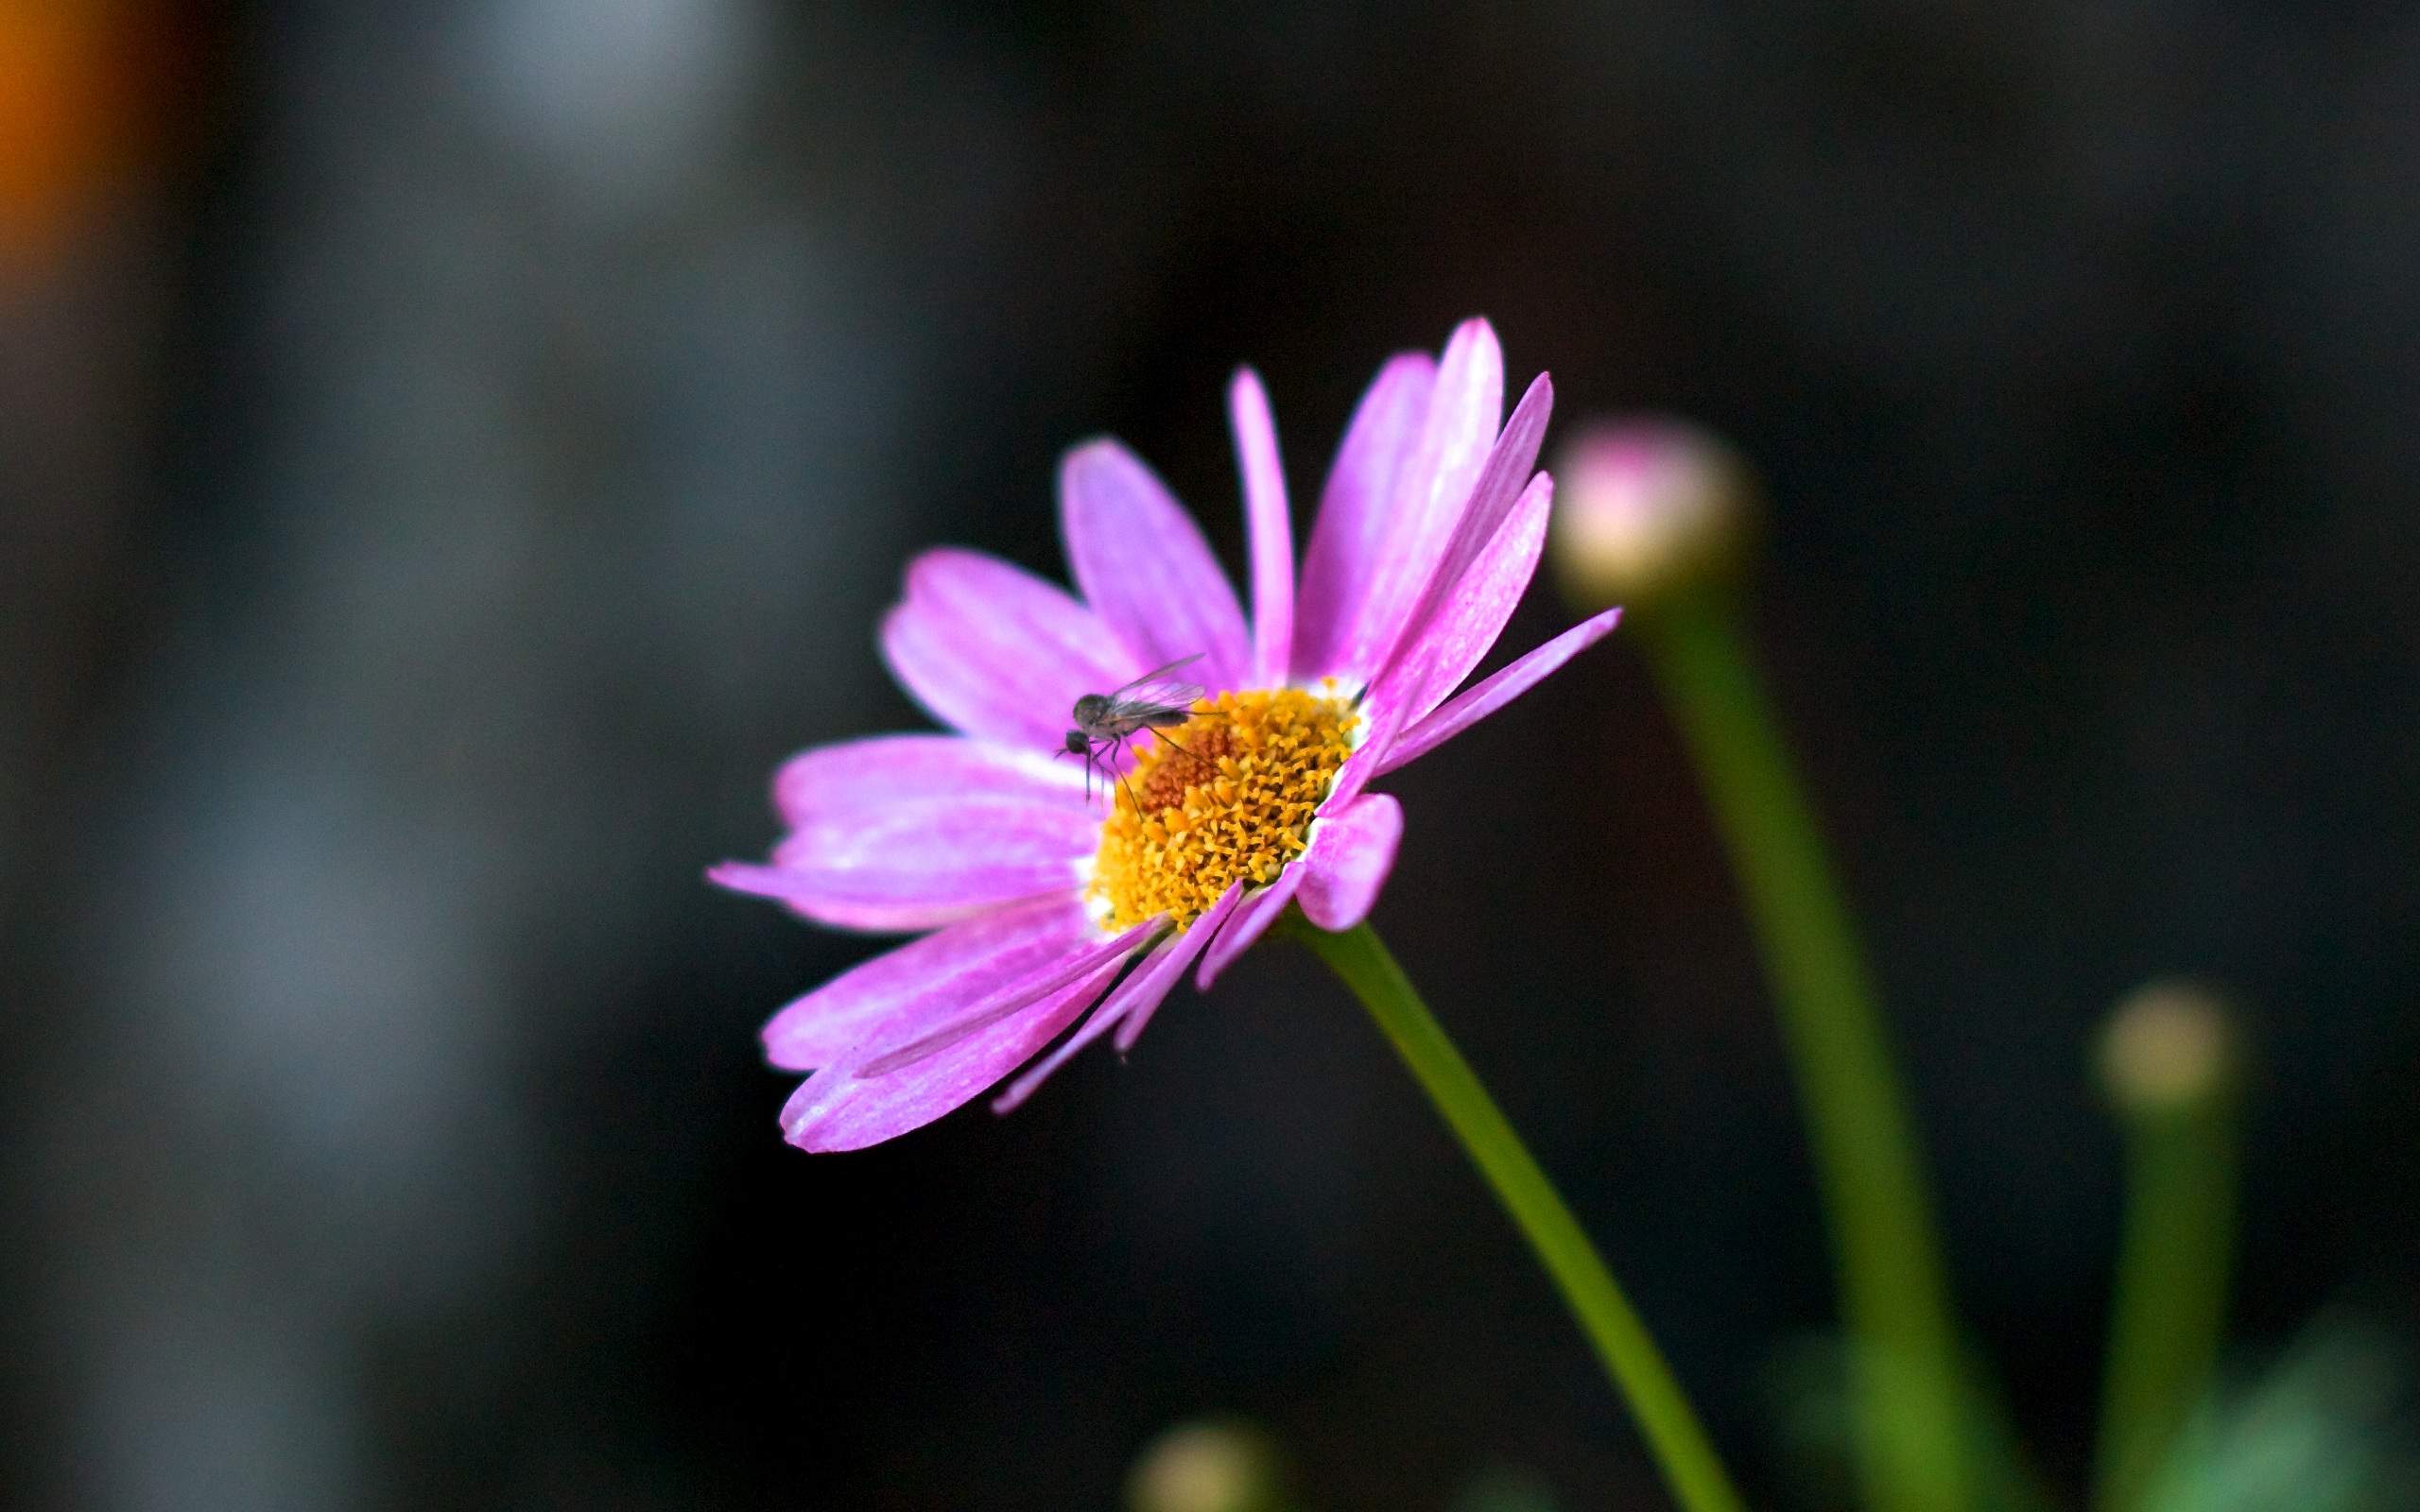 Daisy Pink Flowers HD Wallpaper For Desktop in High Quality